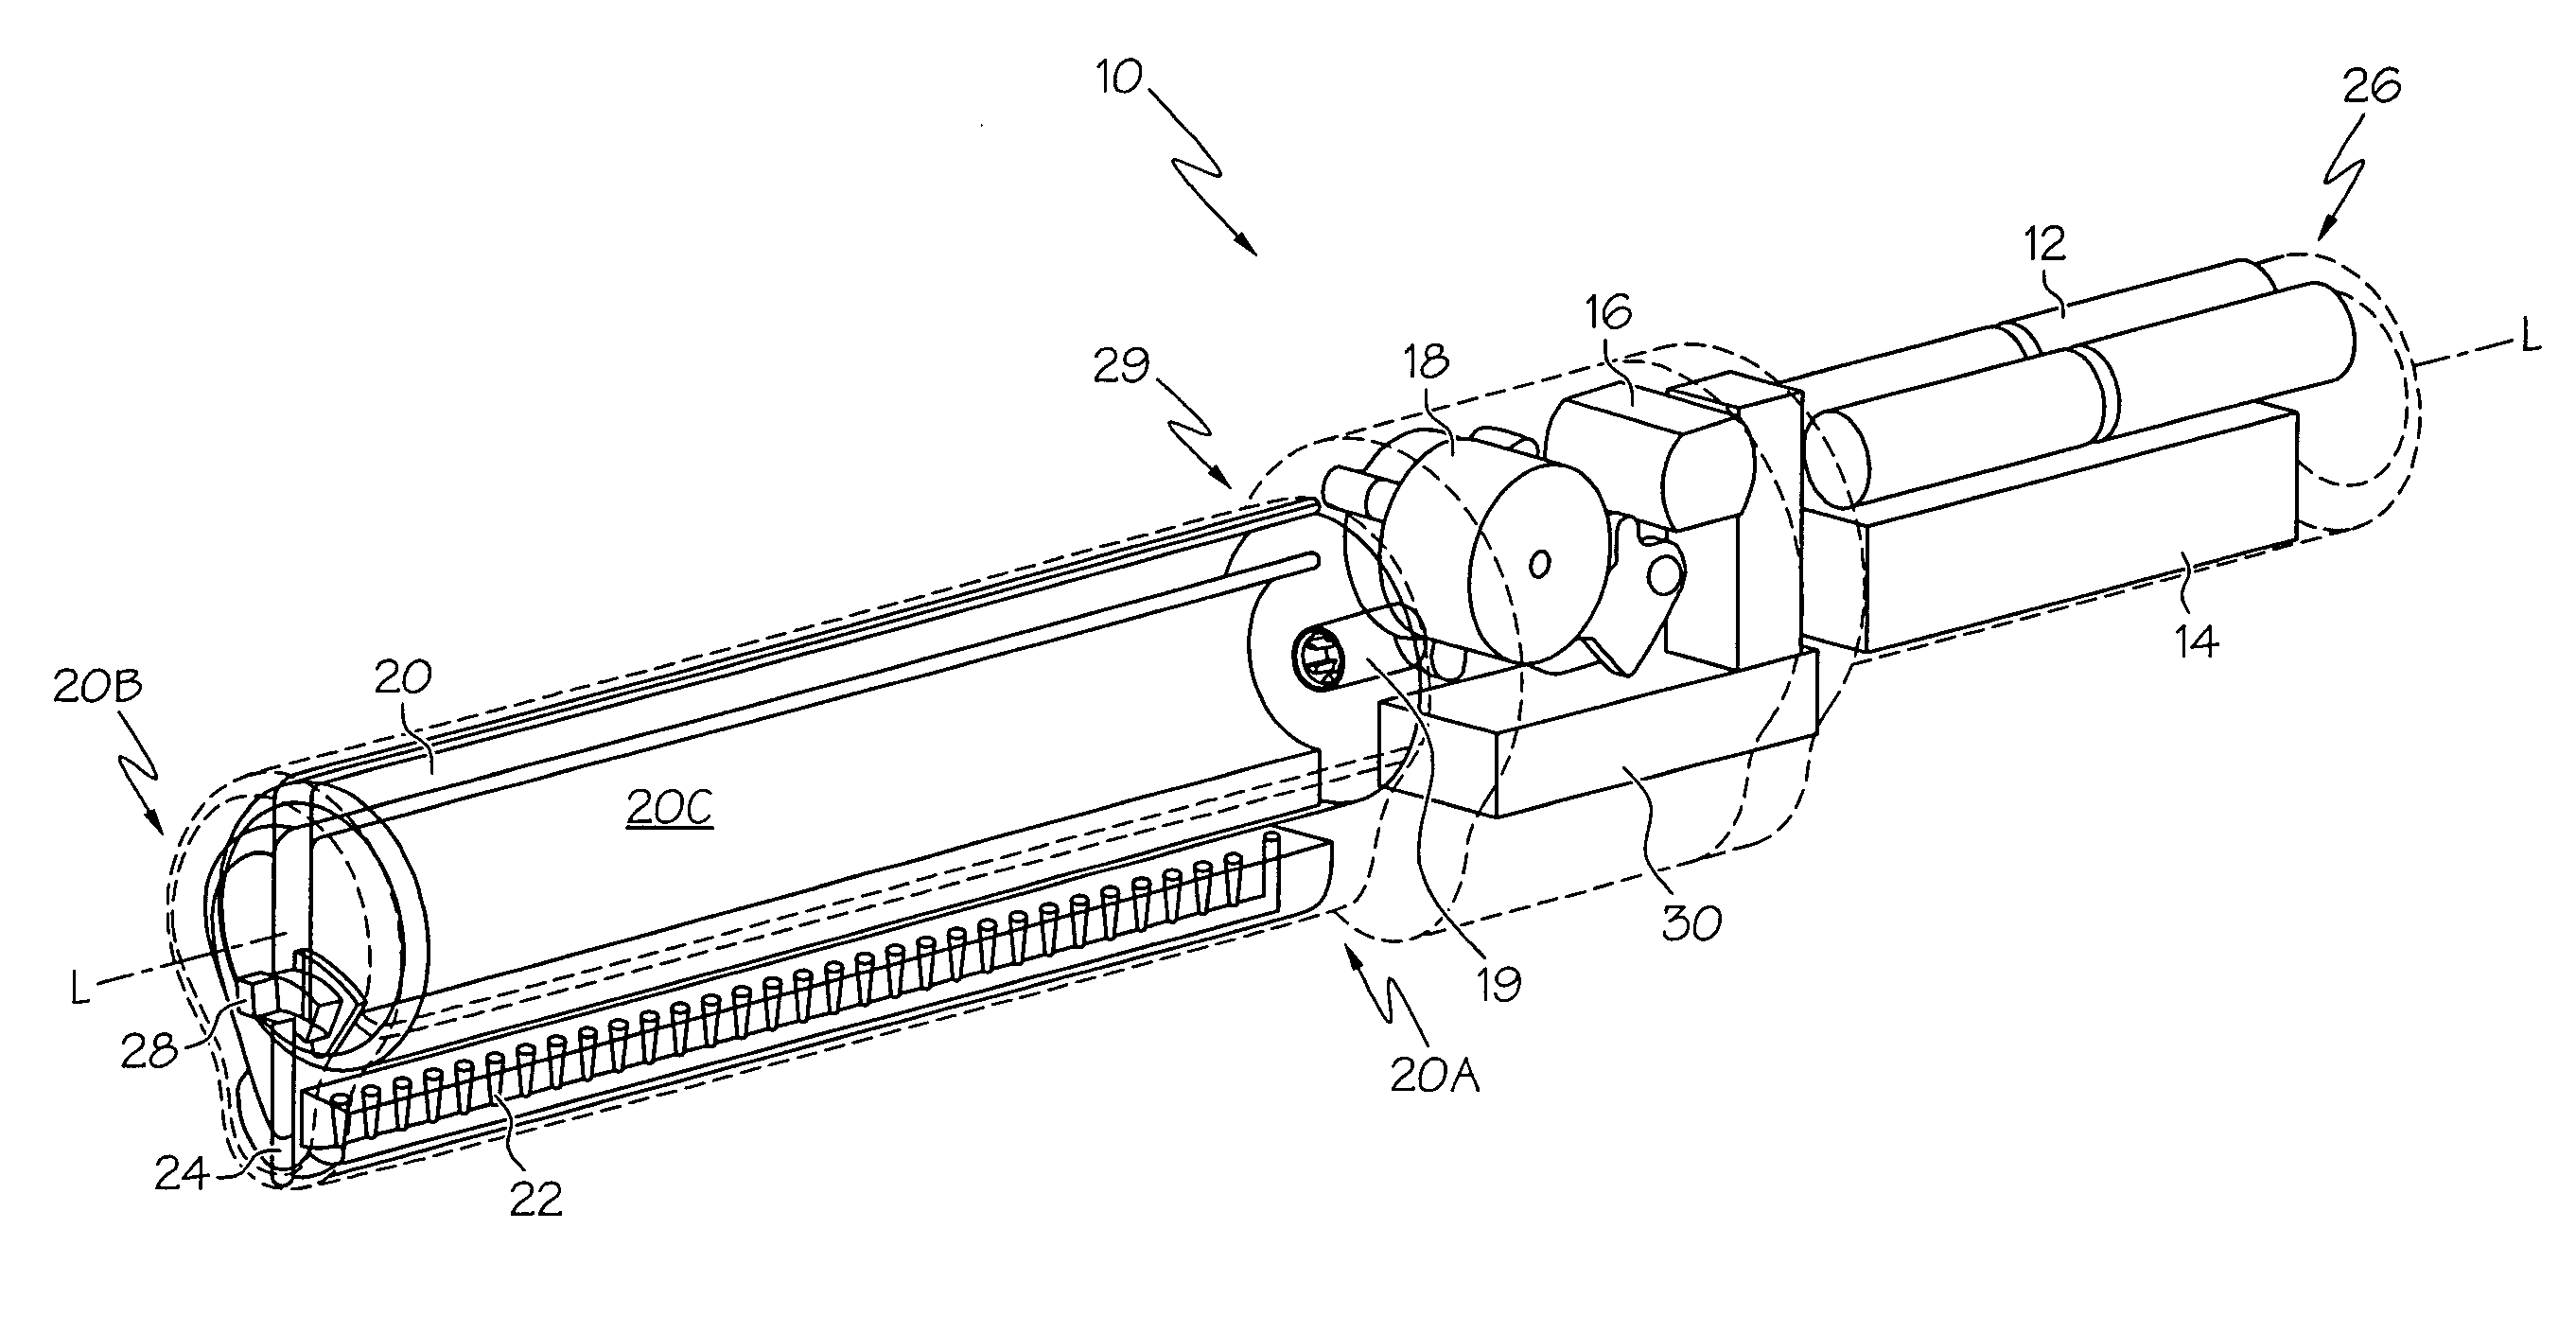 Handheld sprayer with removable cartridge and method of using same